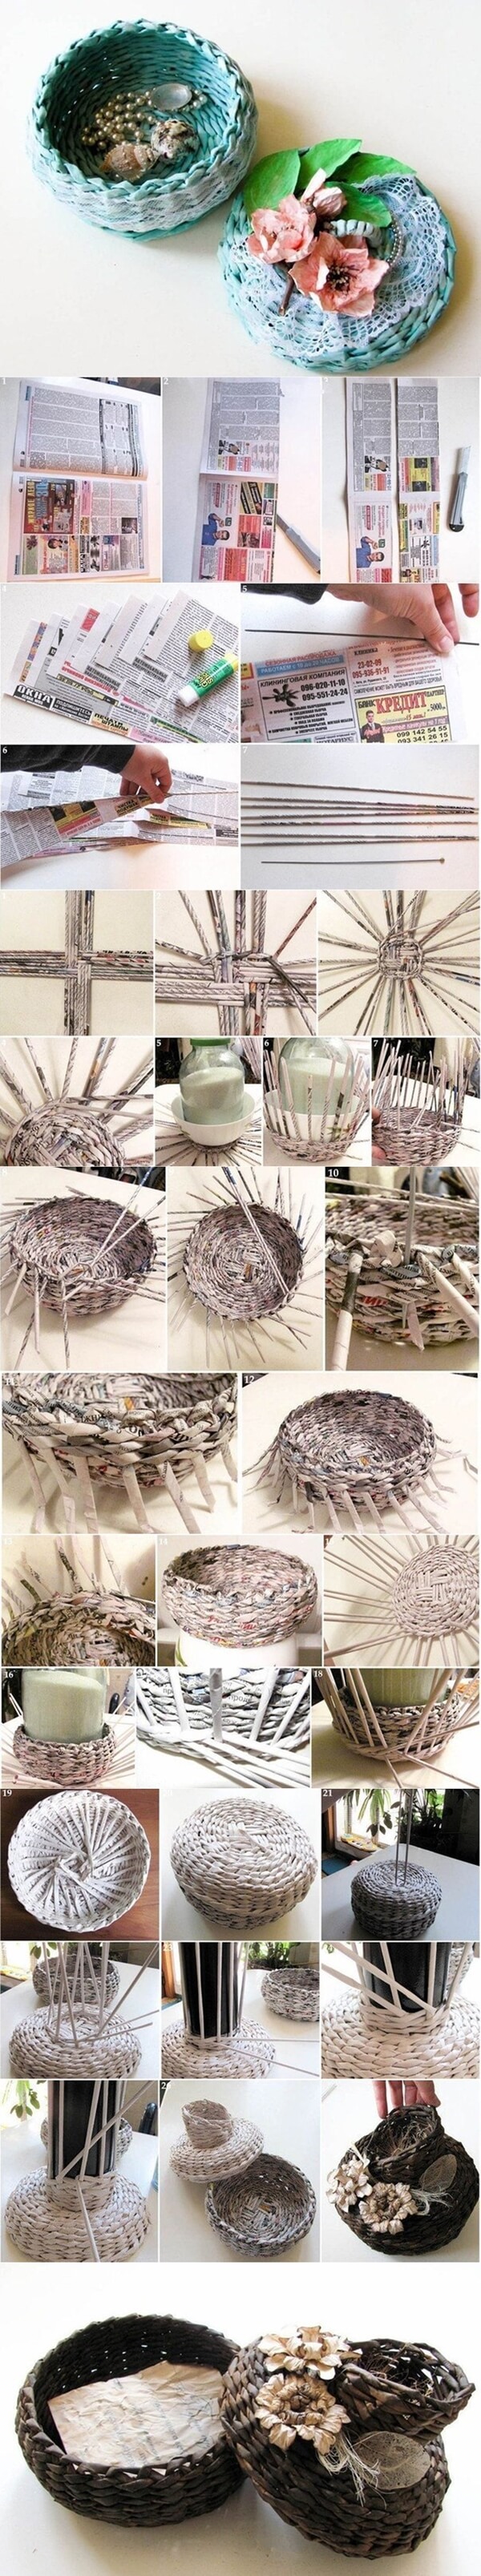 DIY Covered Woven Basket from Newspaper Craft tutorials from Old Newspapers & Magazines - Step by step